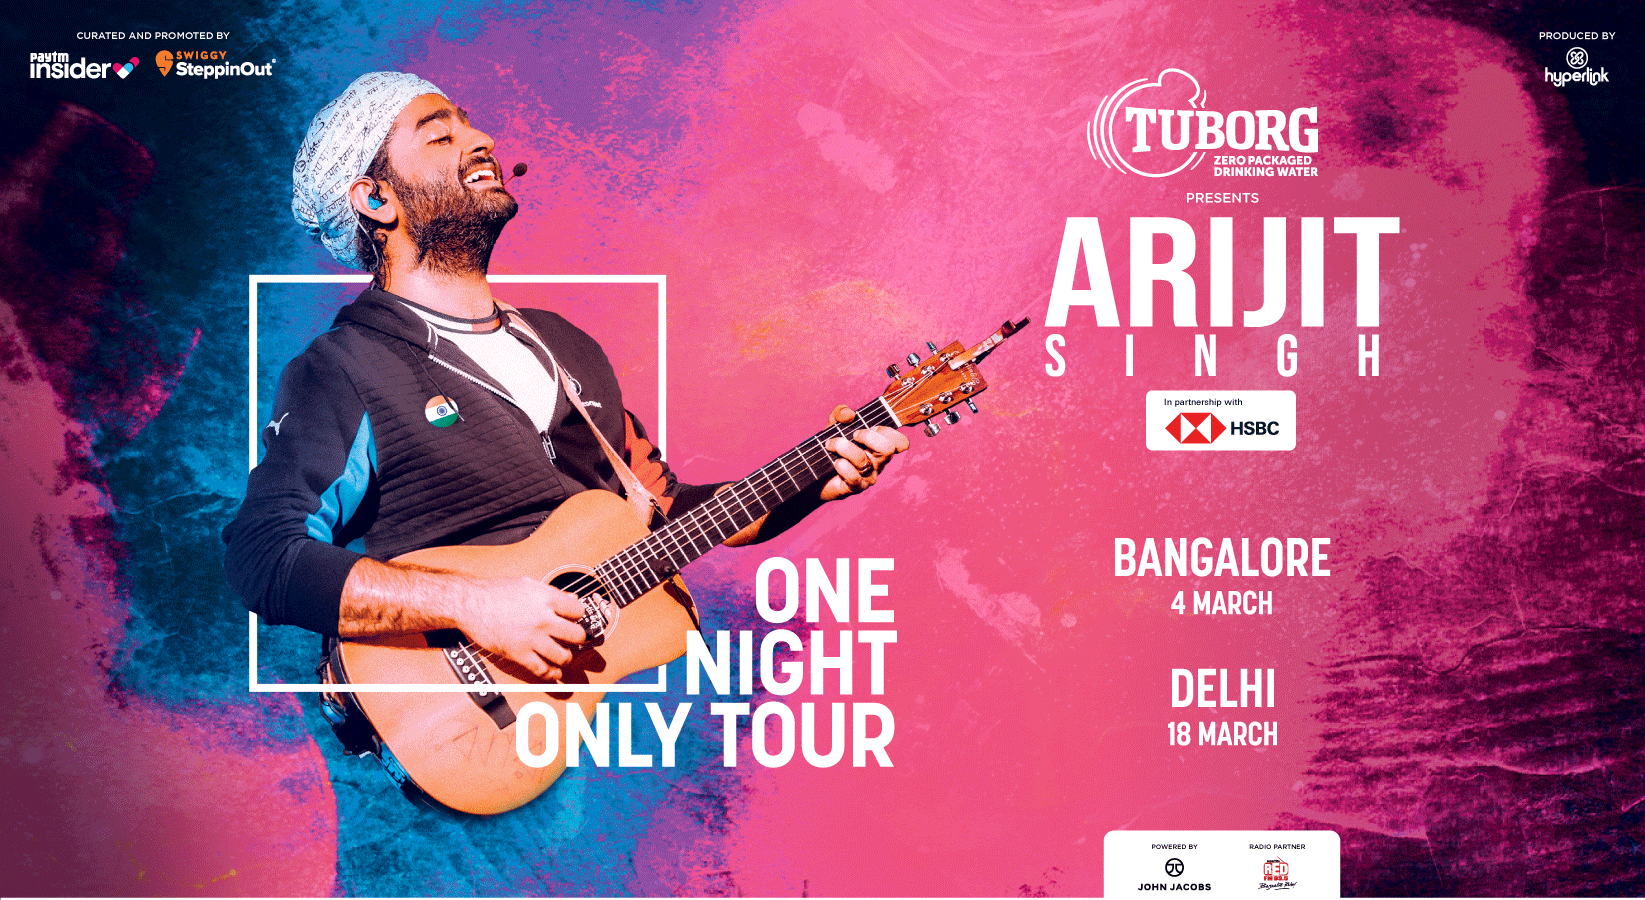 Arijit Singh LIVE on the One Night Only Tour! 🥳